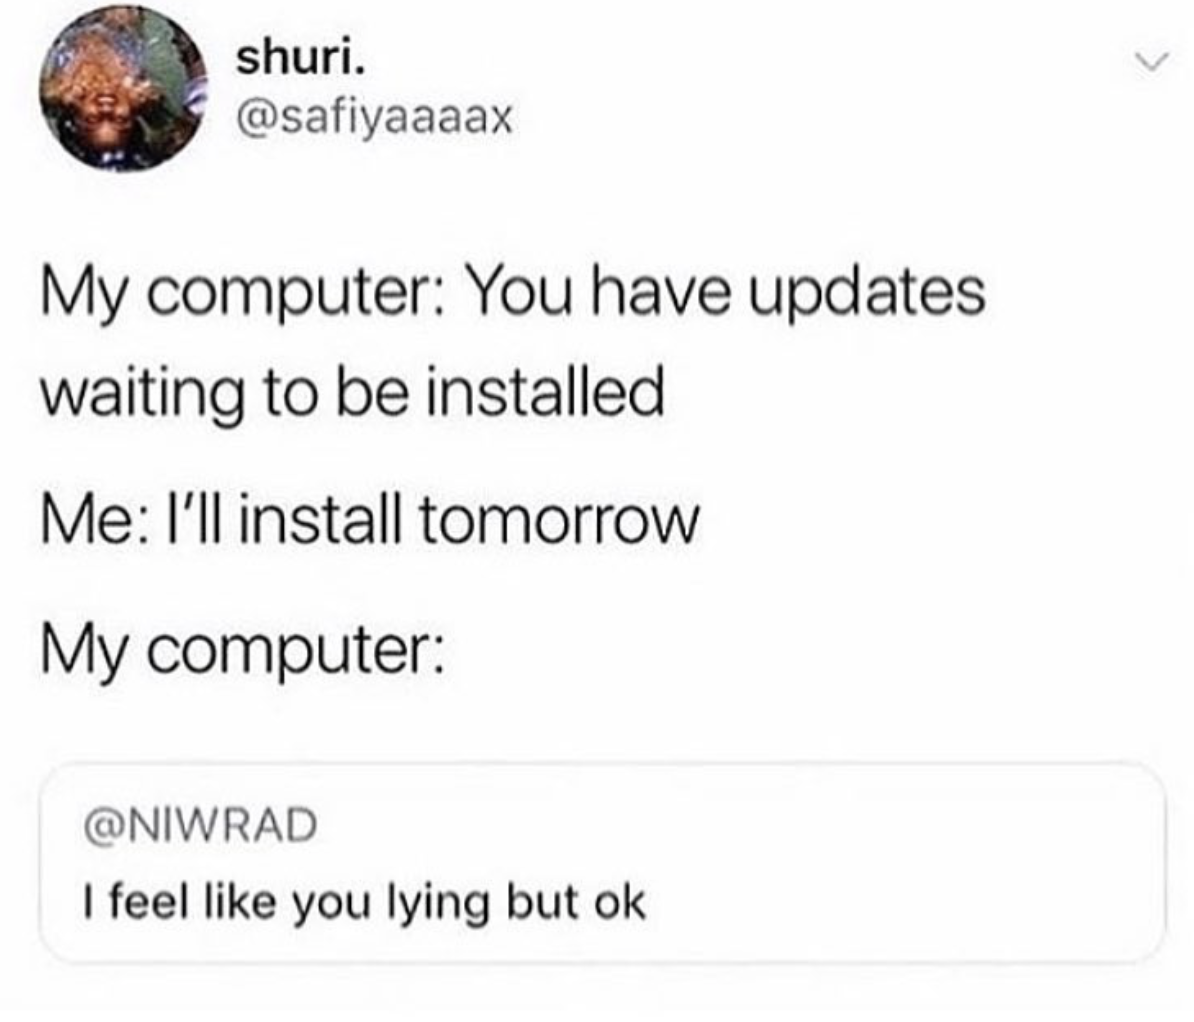 fuck russ meme - shuri. My computer You have updates waiting to be installed Me I'll install tomorrow My computer I feel you lying but ok